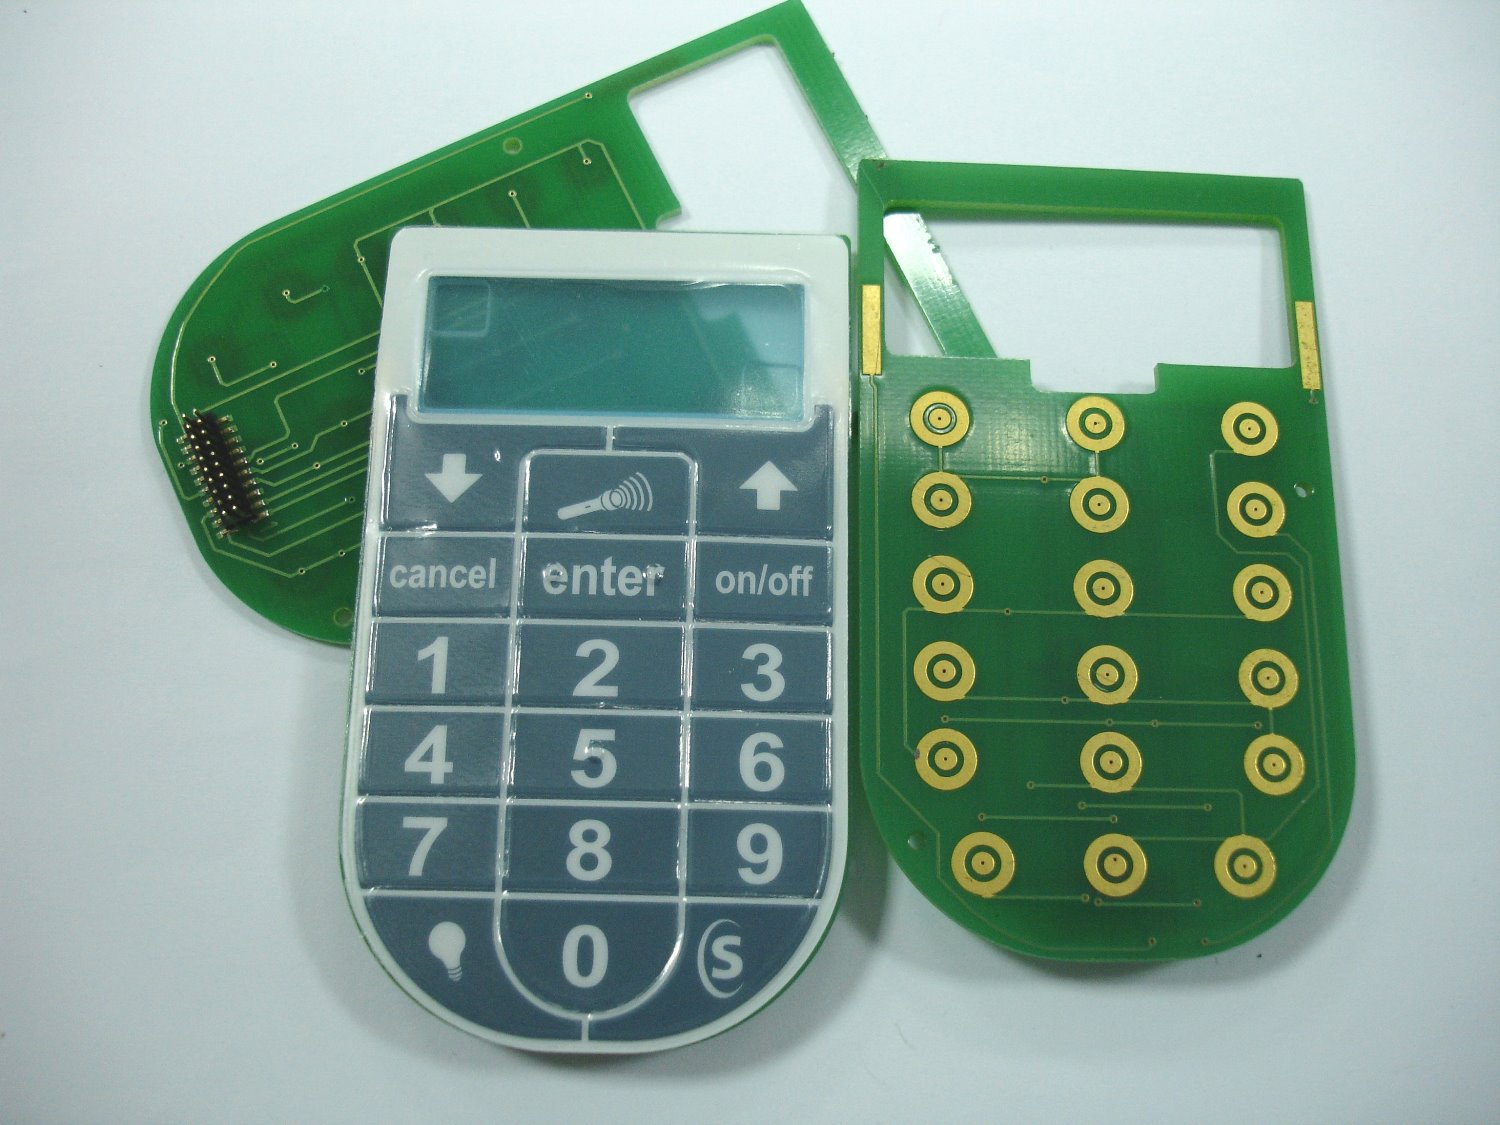 Difference between single and double-sided PCB boards